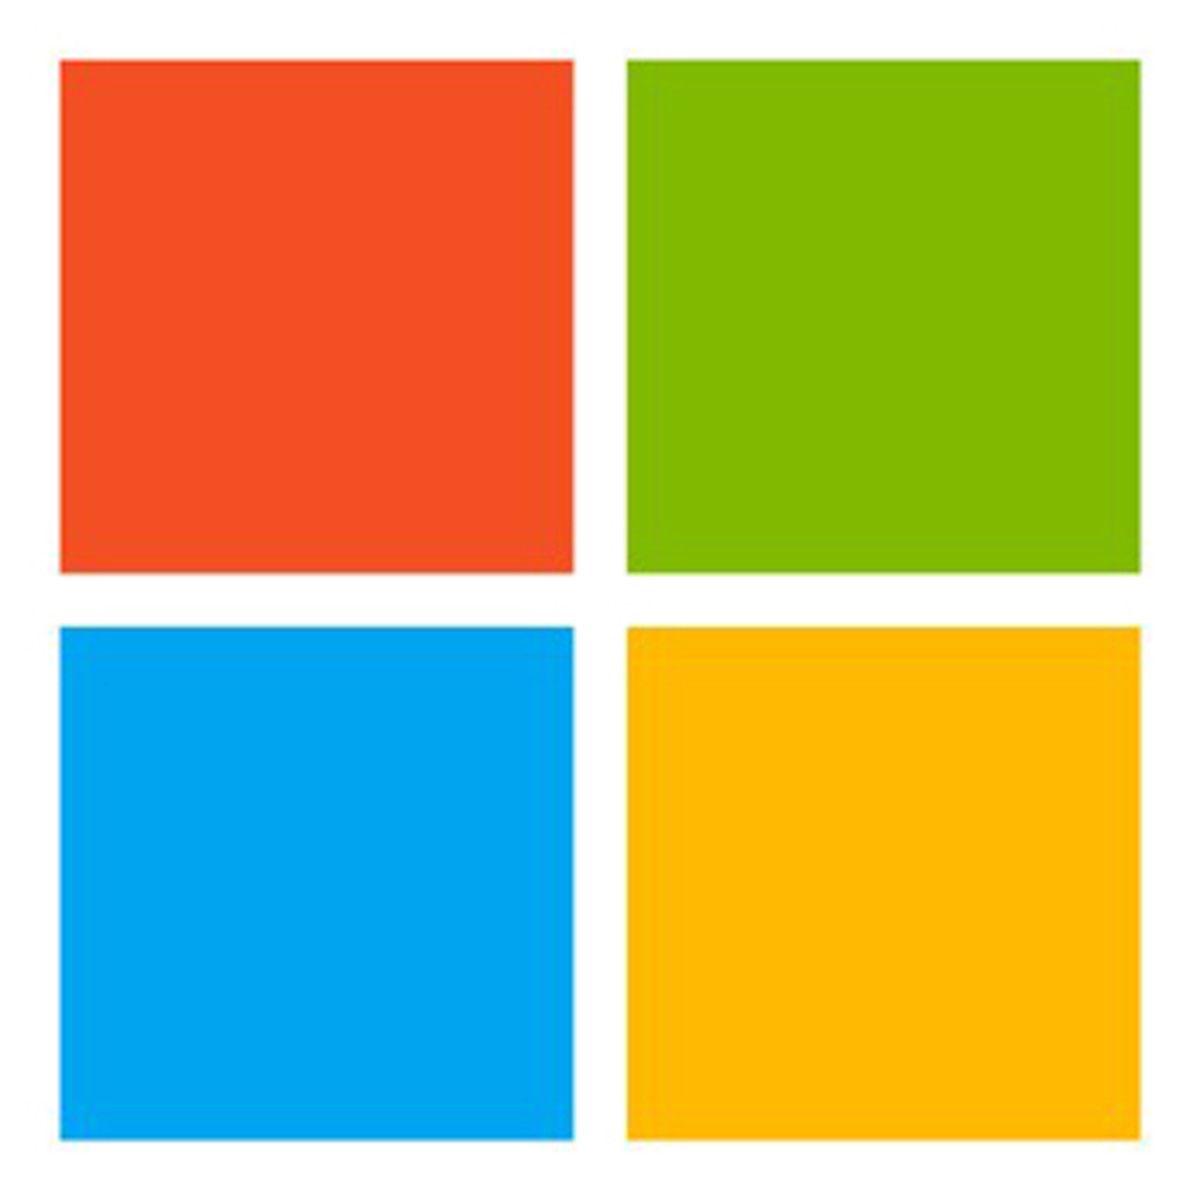 Windows 11 Logo - Microsoft extends Windows 10 commitment to at least 2026 but reduces